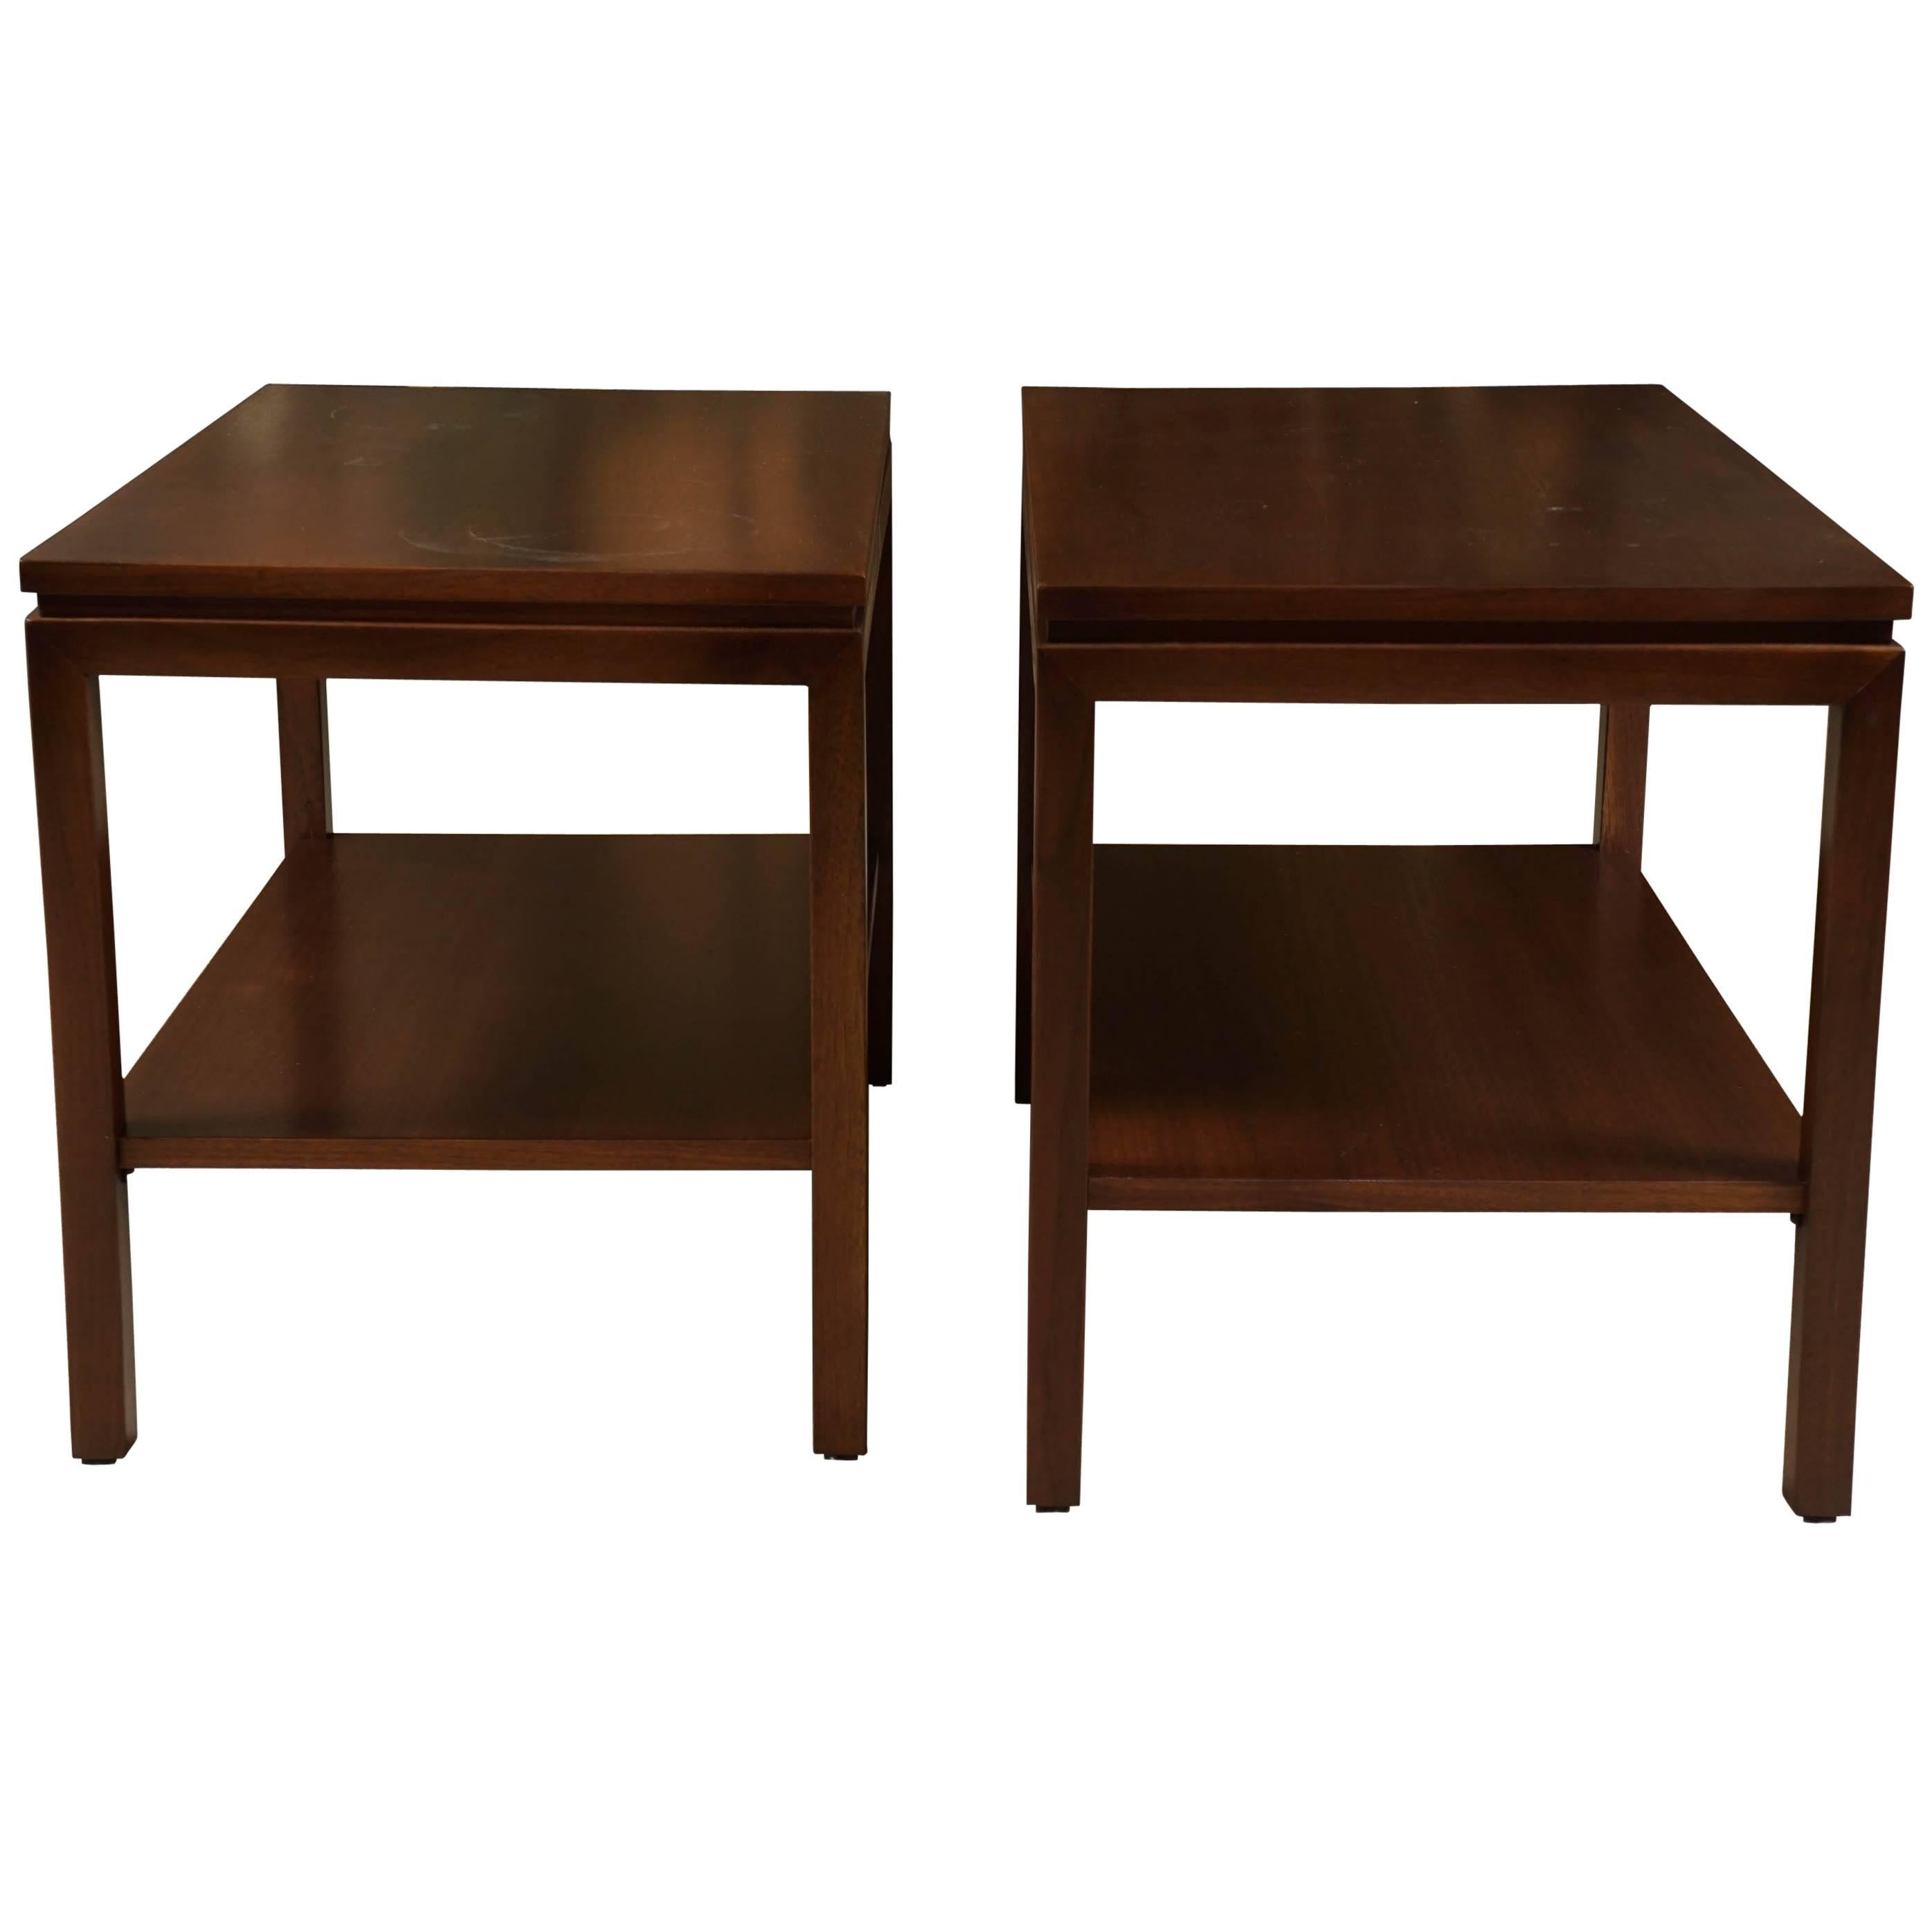 Pair of Modern Walnut End Tables with Shelves